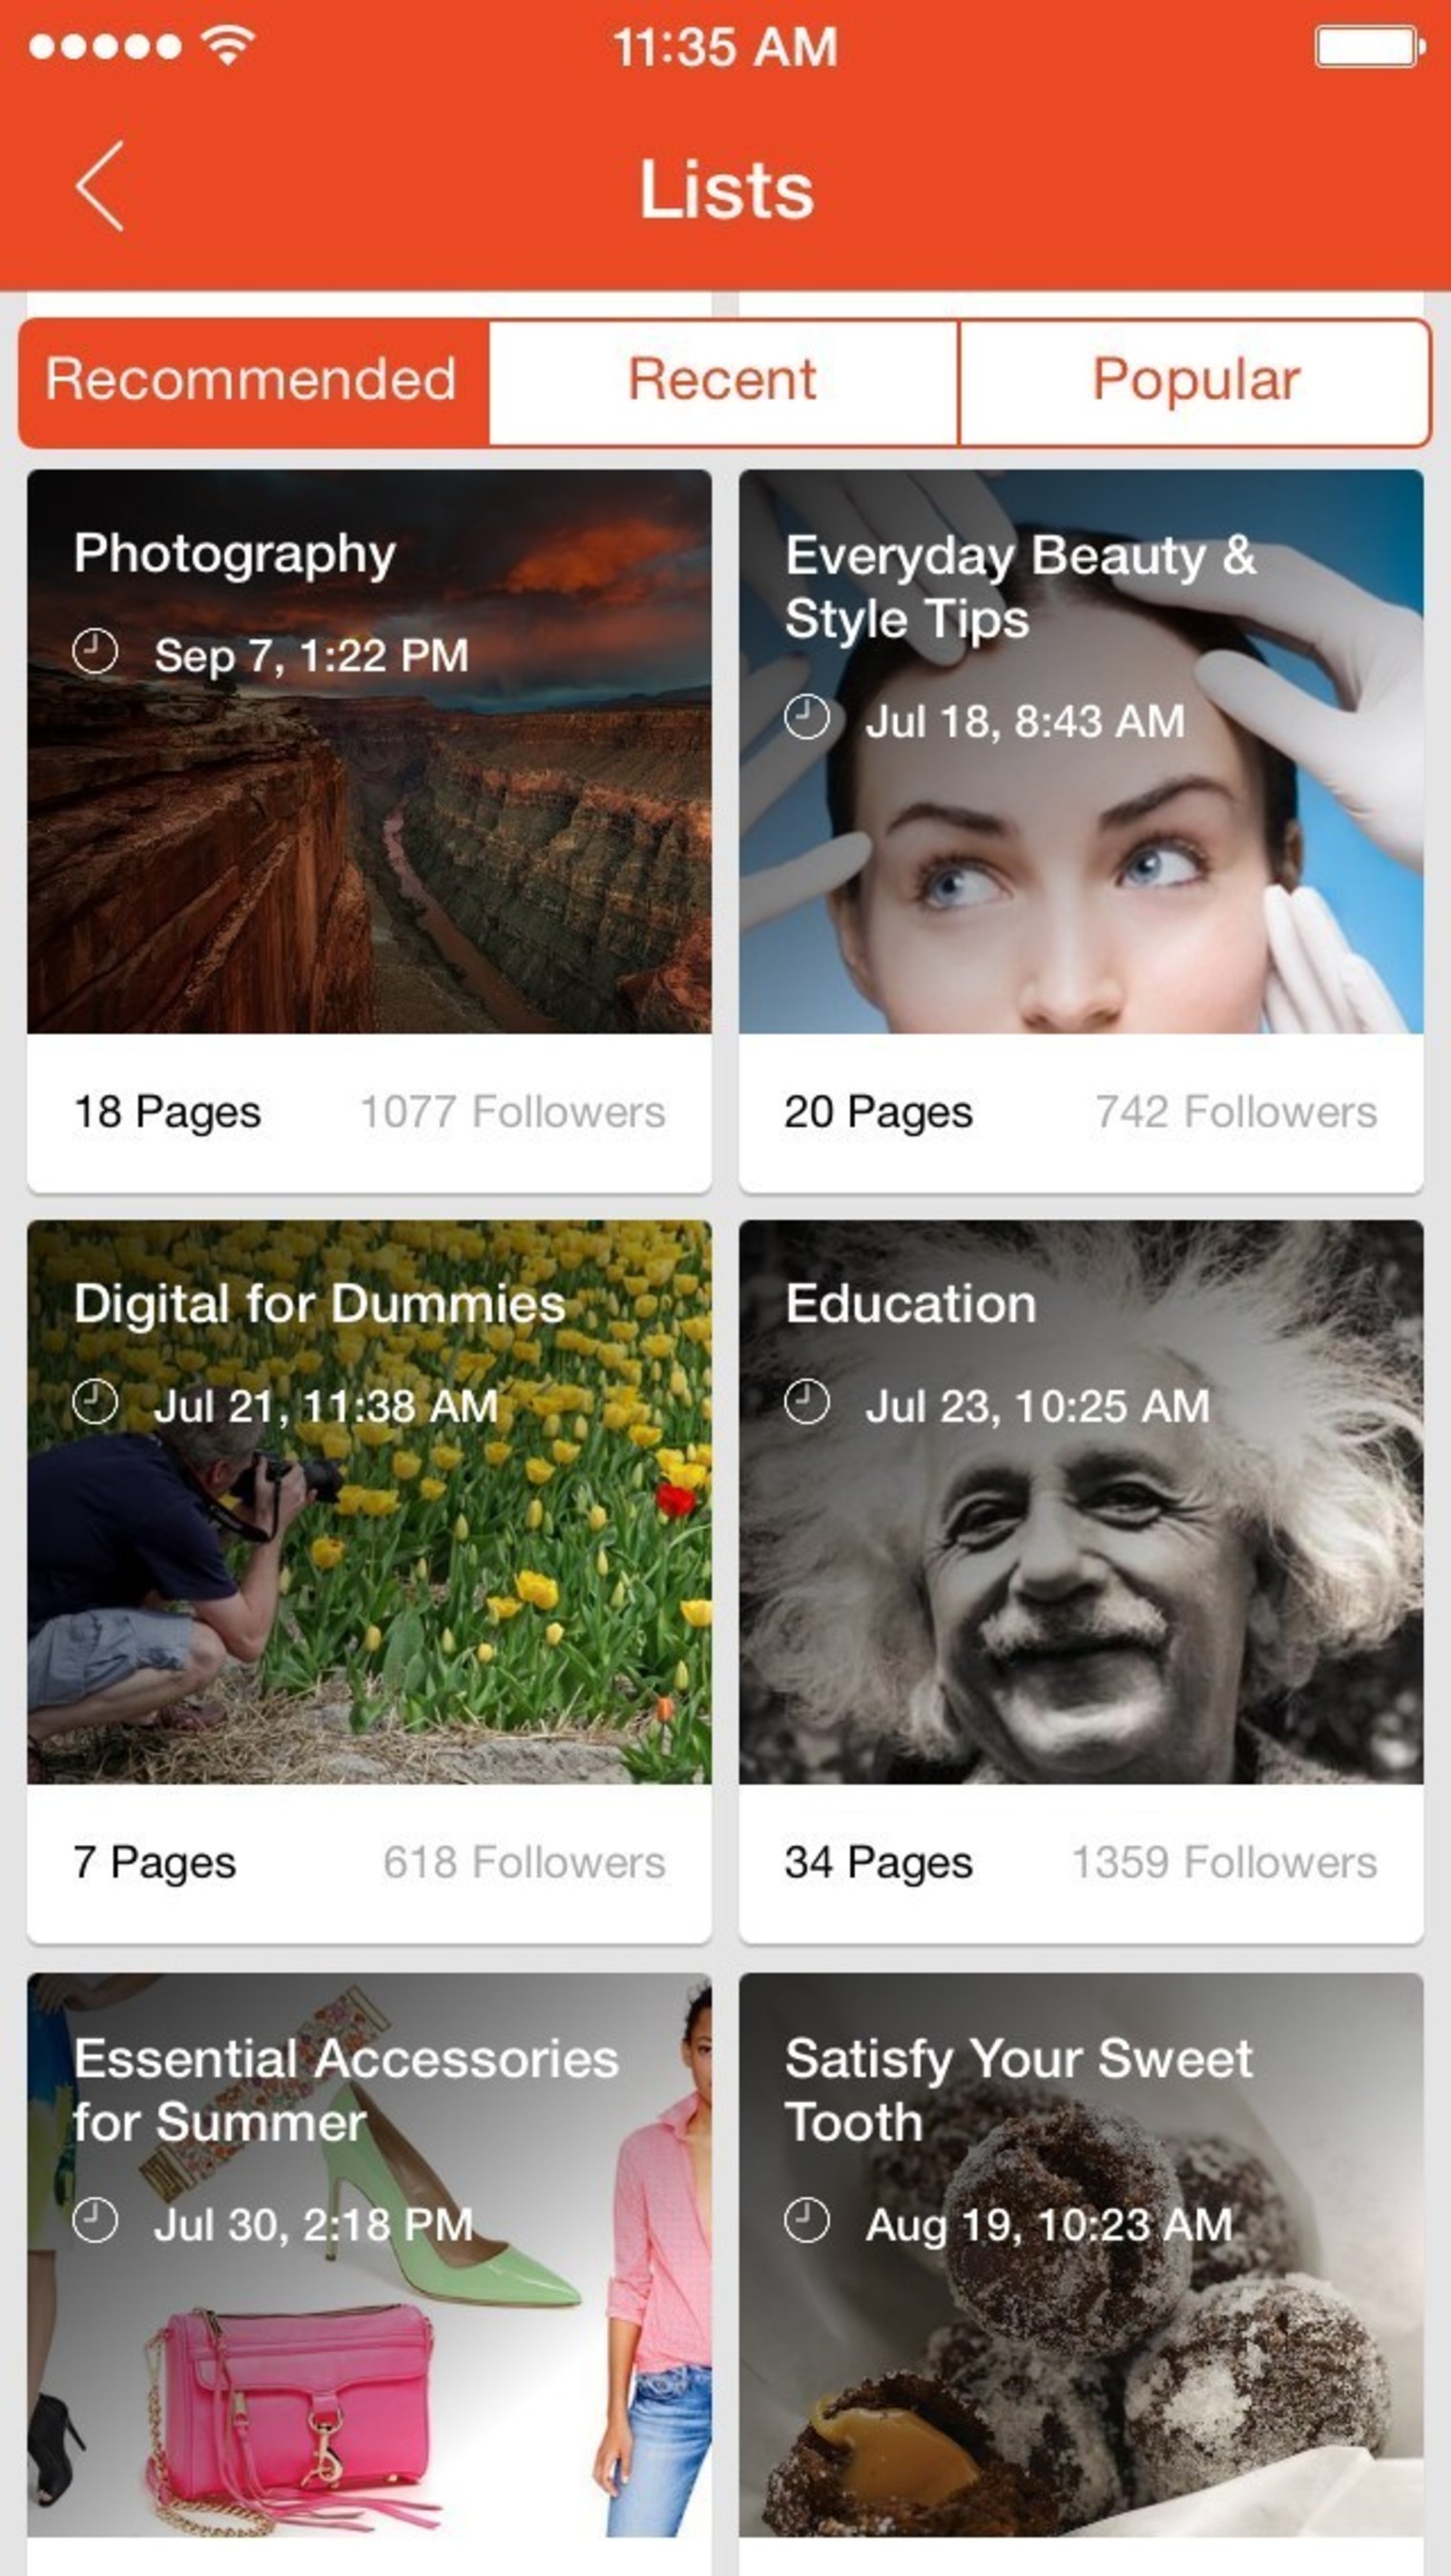 Never Be Bored Again: 5 Reasons Why the New StumbleUpon iOS App Should Be Your Go-to for Instant Entertainment